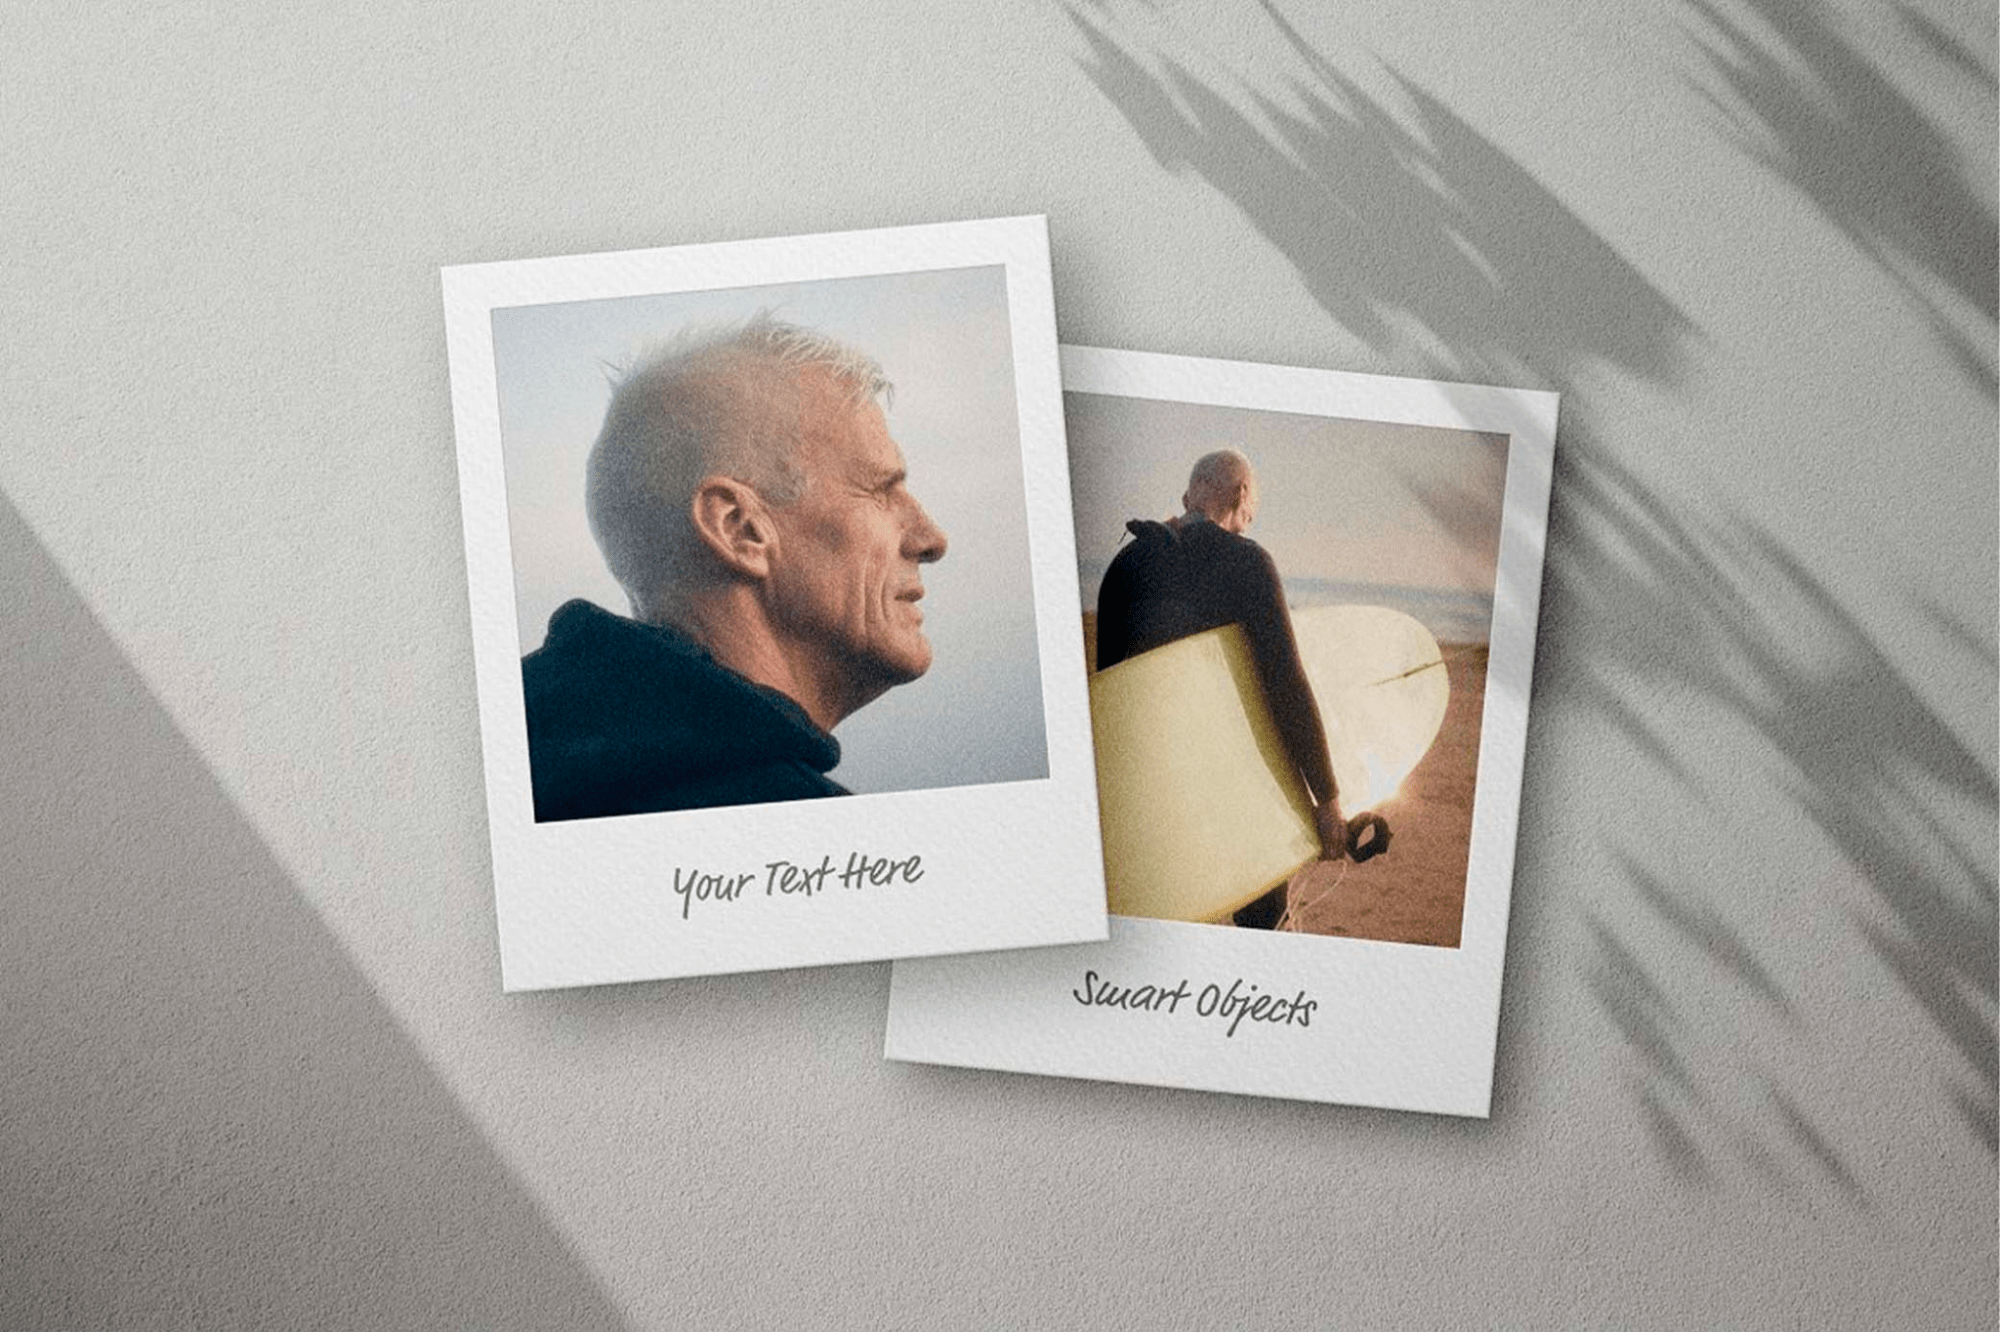 Two Polaroid-style photo mockups with shadow overlay, capturing nostalgic memories, set against a textured wall.